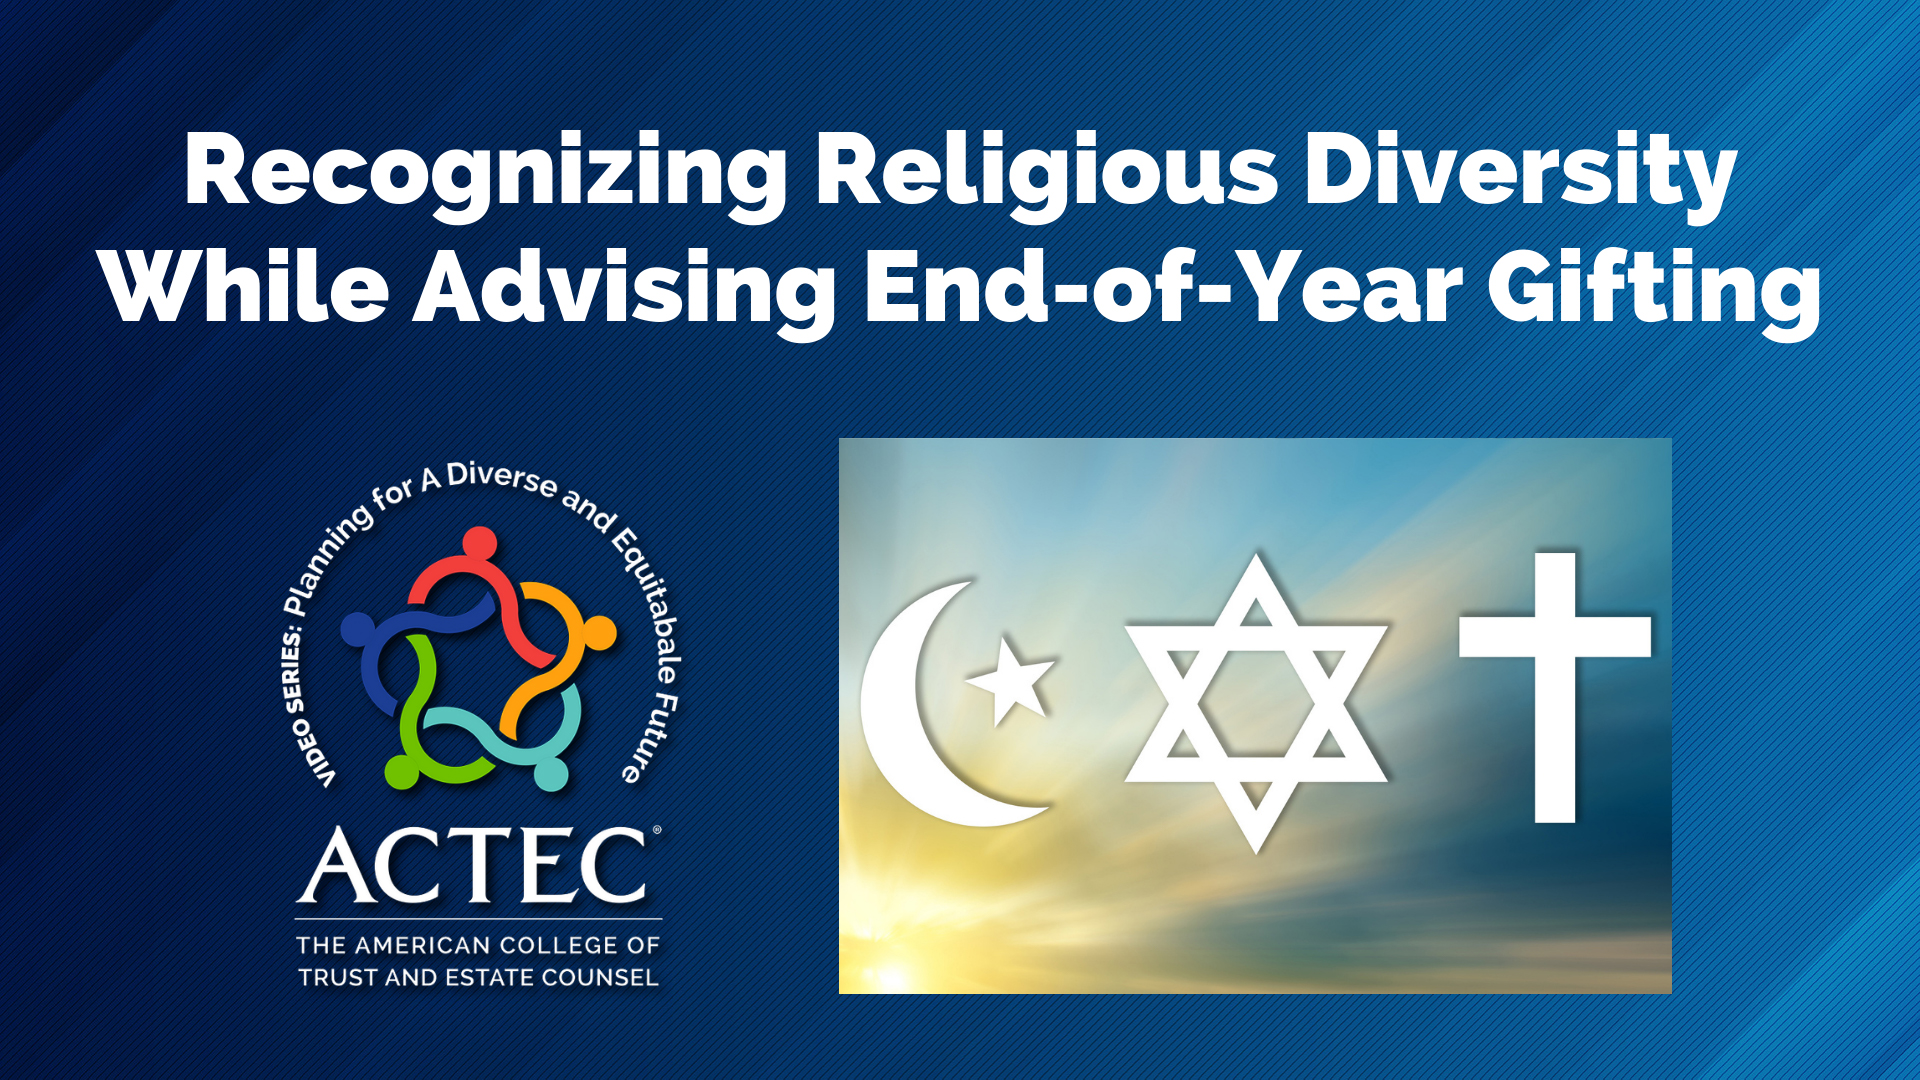 Recognizing Religious Diversity While Advising End-of-Year Gifting